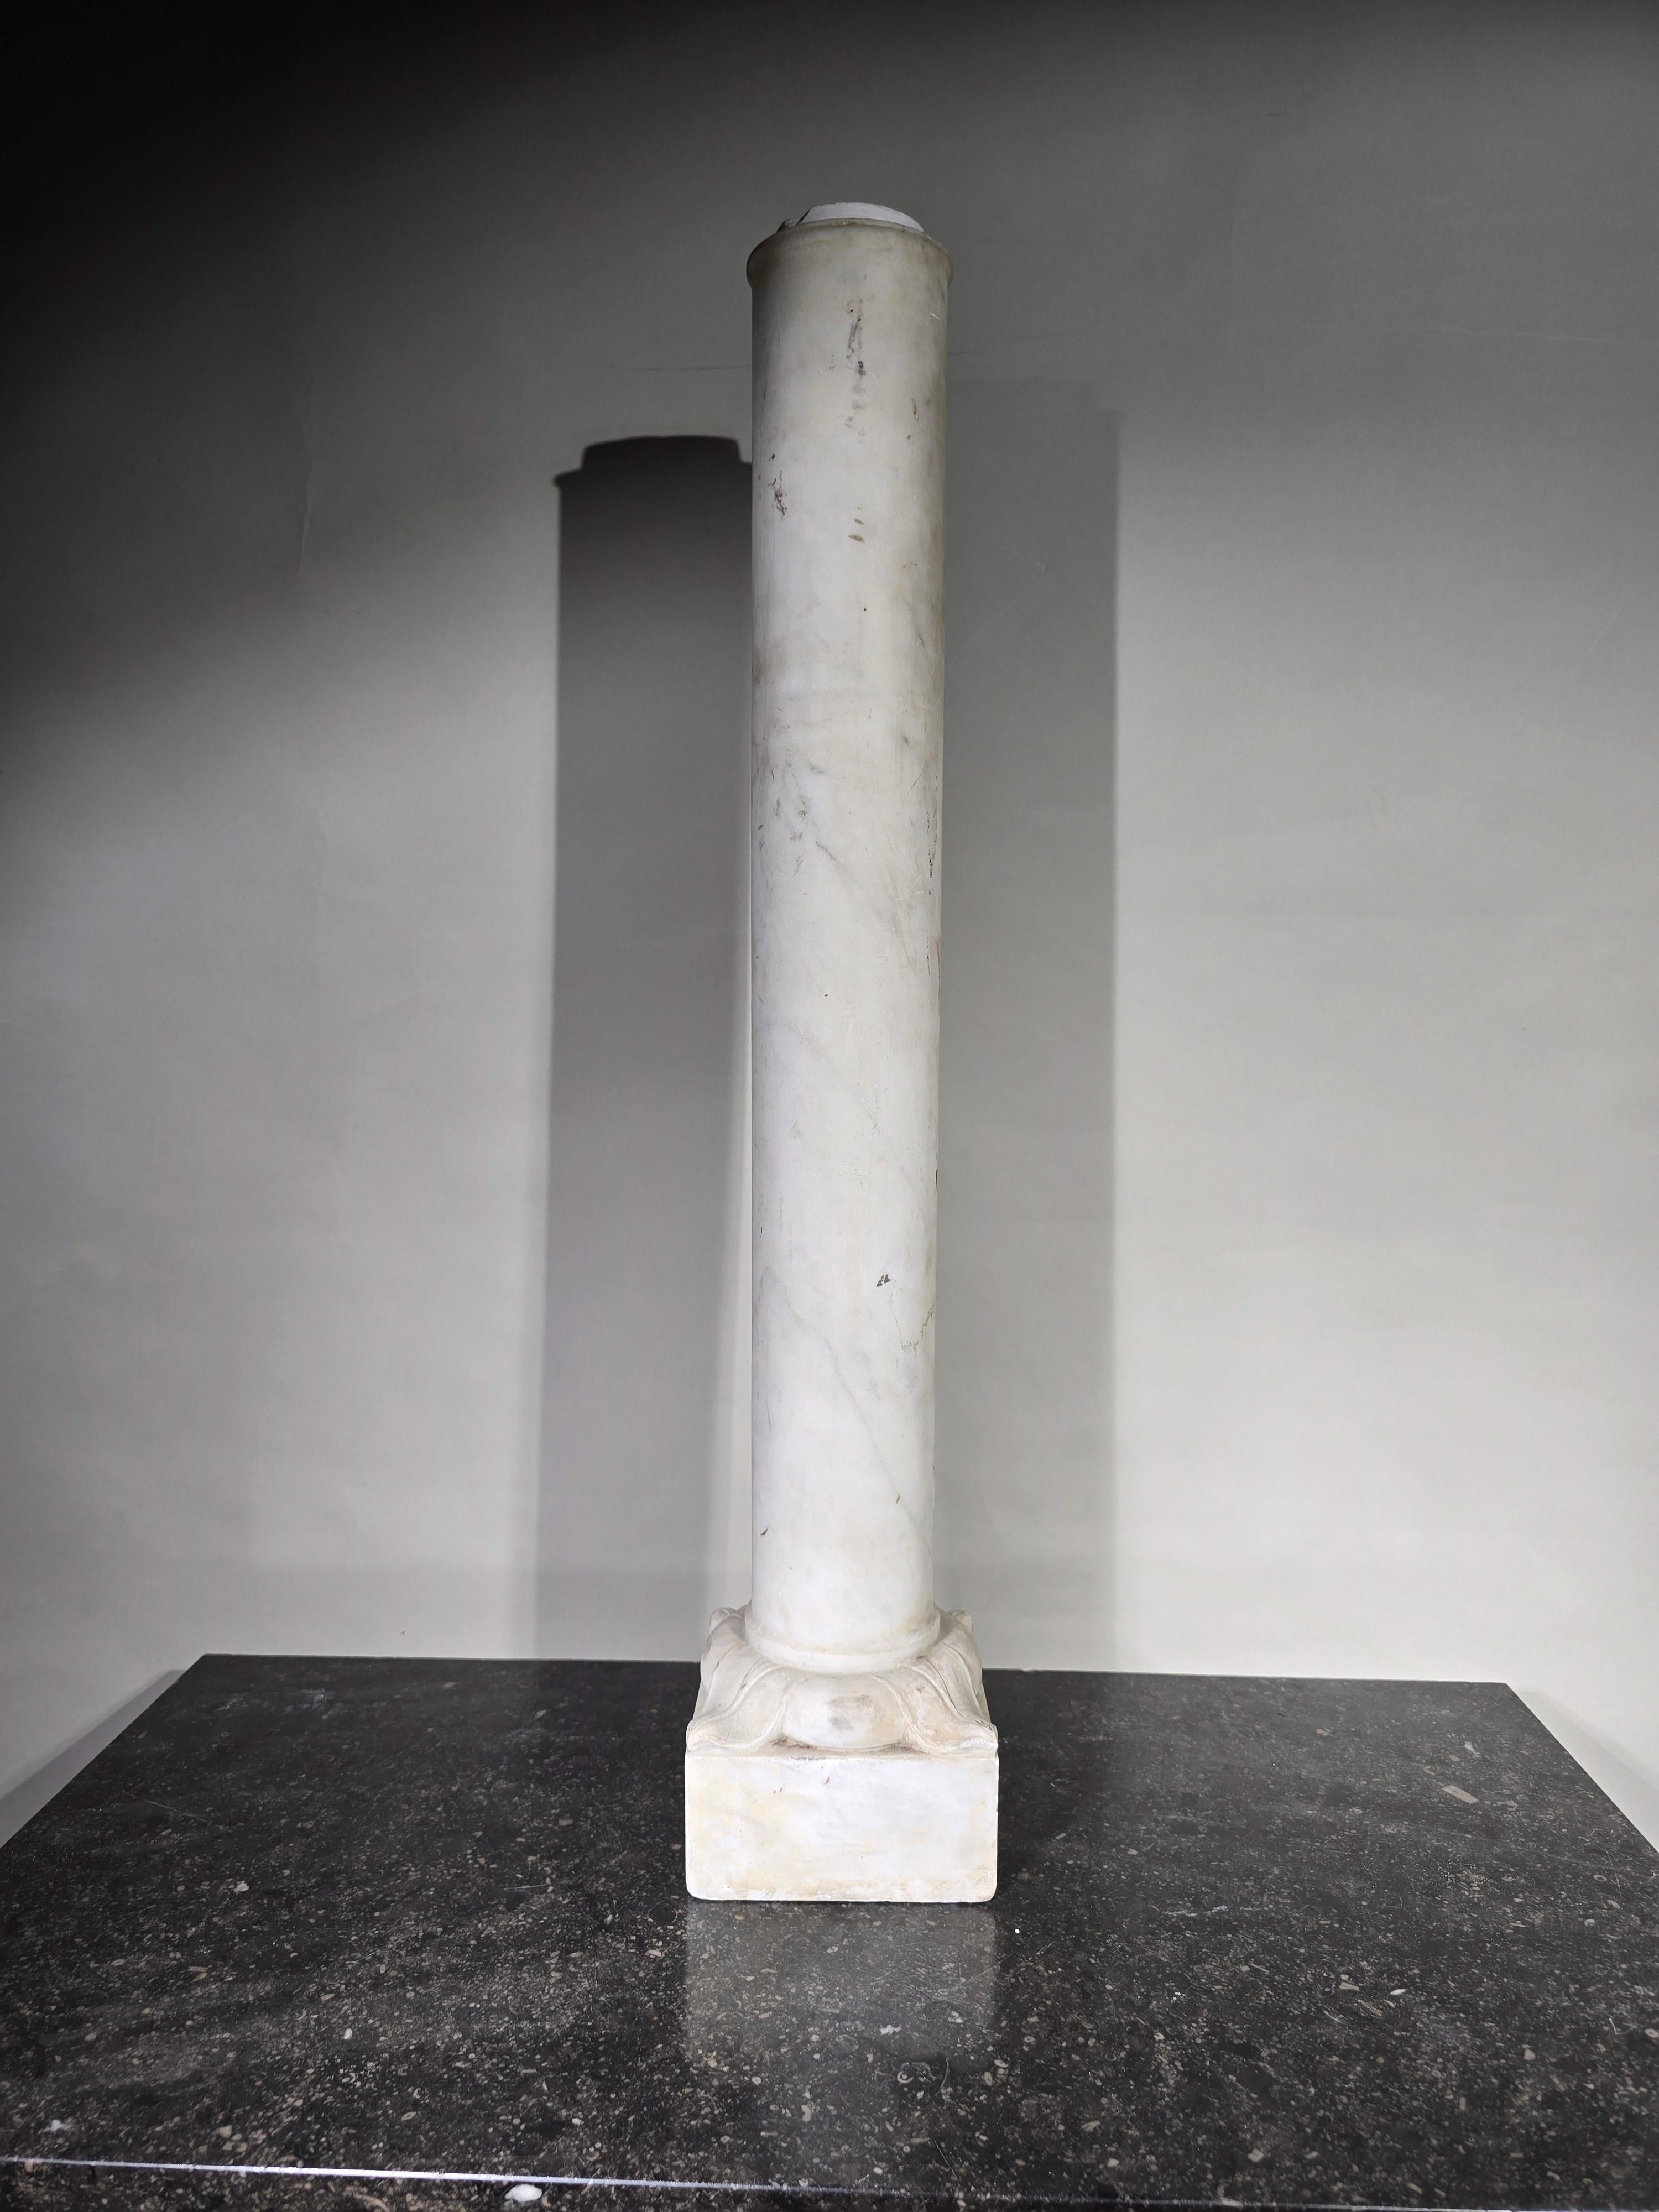 This elegant 19th-century column crafted from white Carrara marble from Italy is a piece of great beauty and refinement. In good overall condition, it measures 77x14x14 cm.

This column epitomizes the sophistication and elegance of the 19th century.